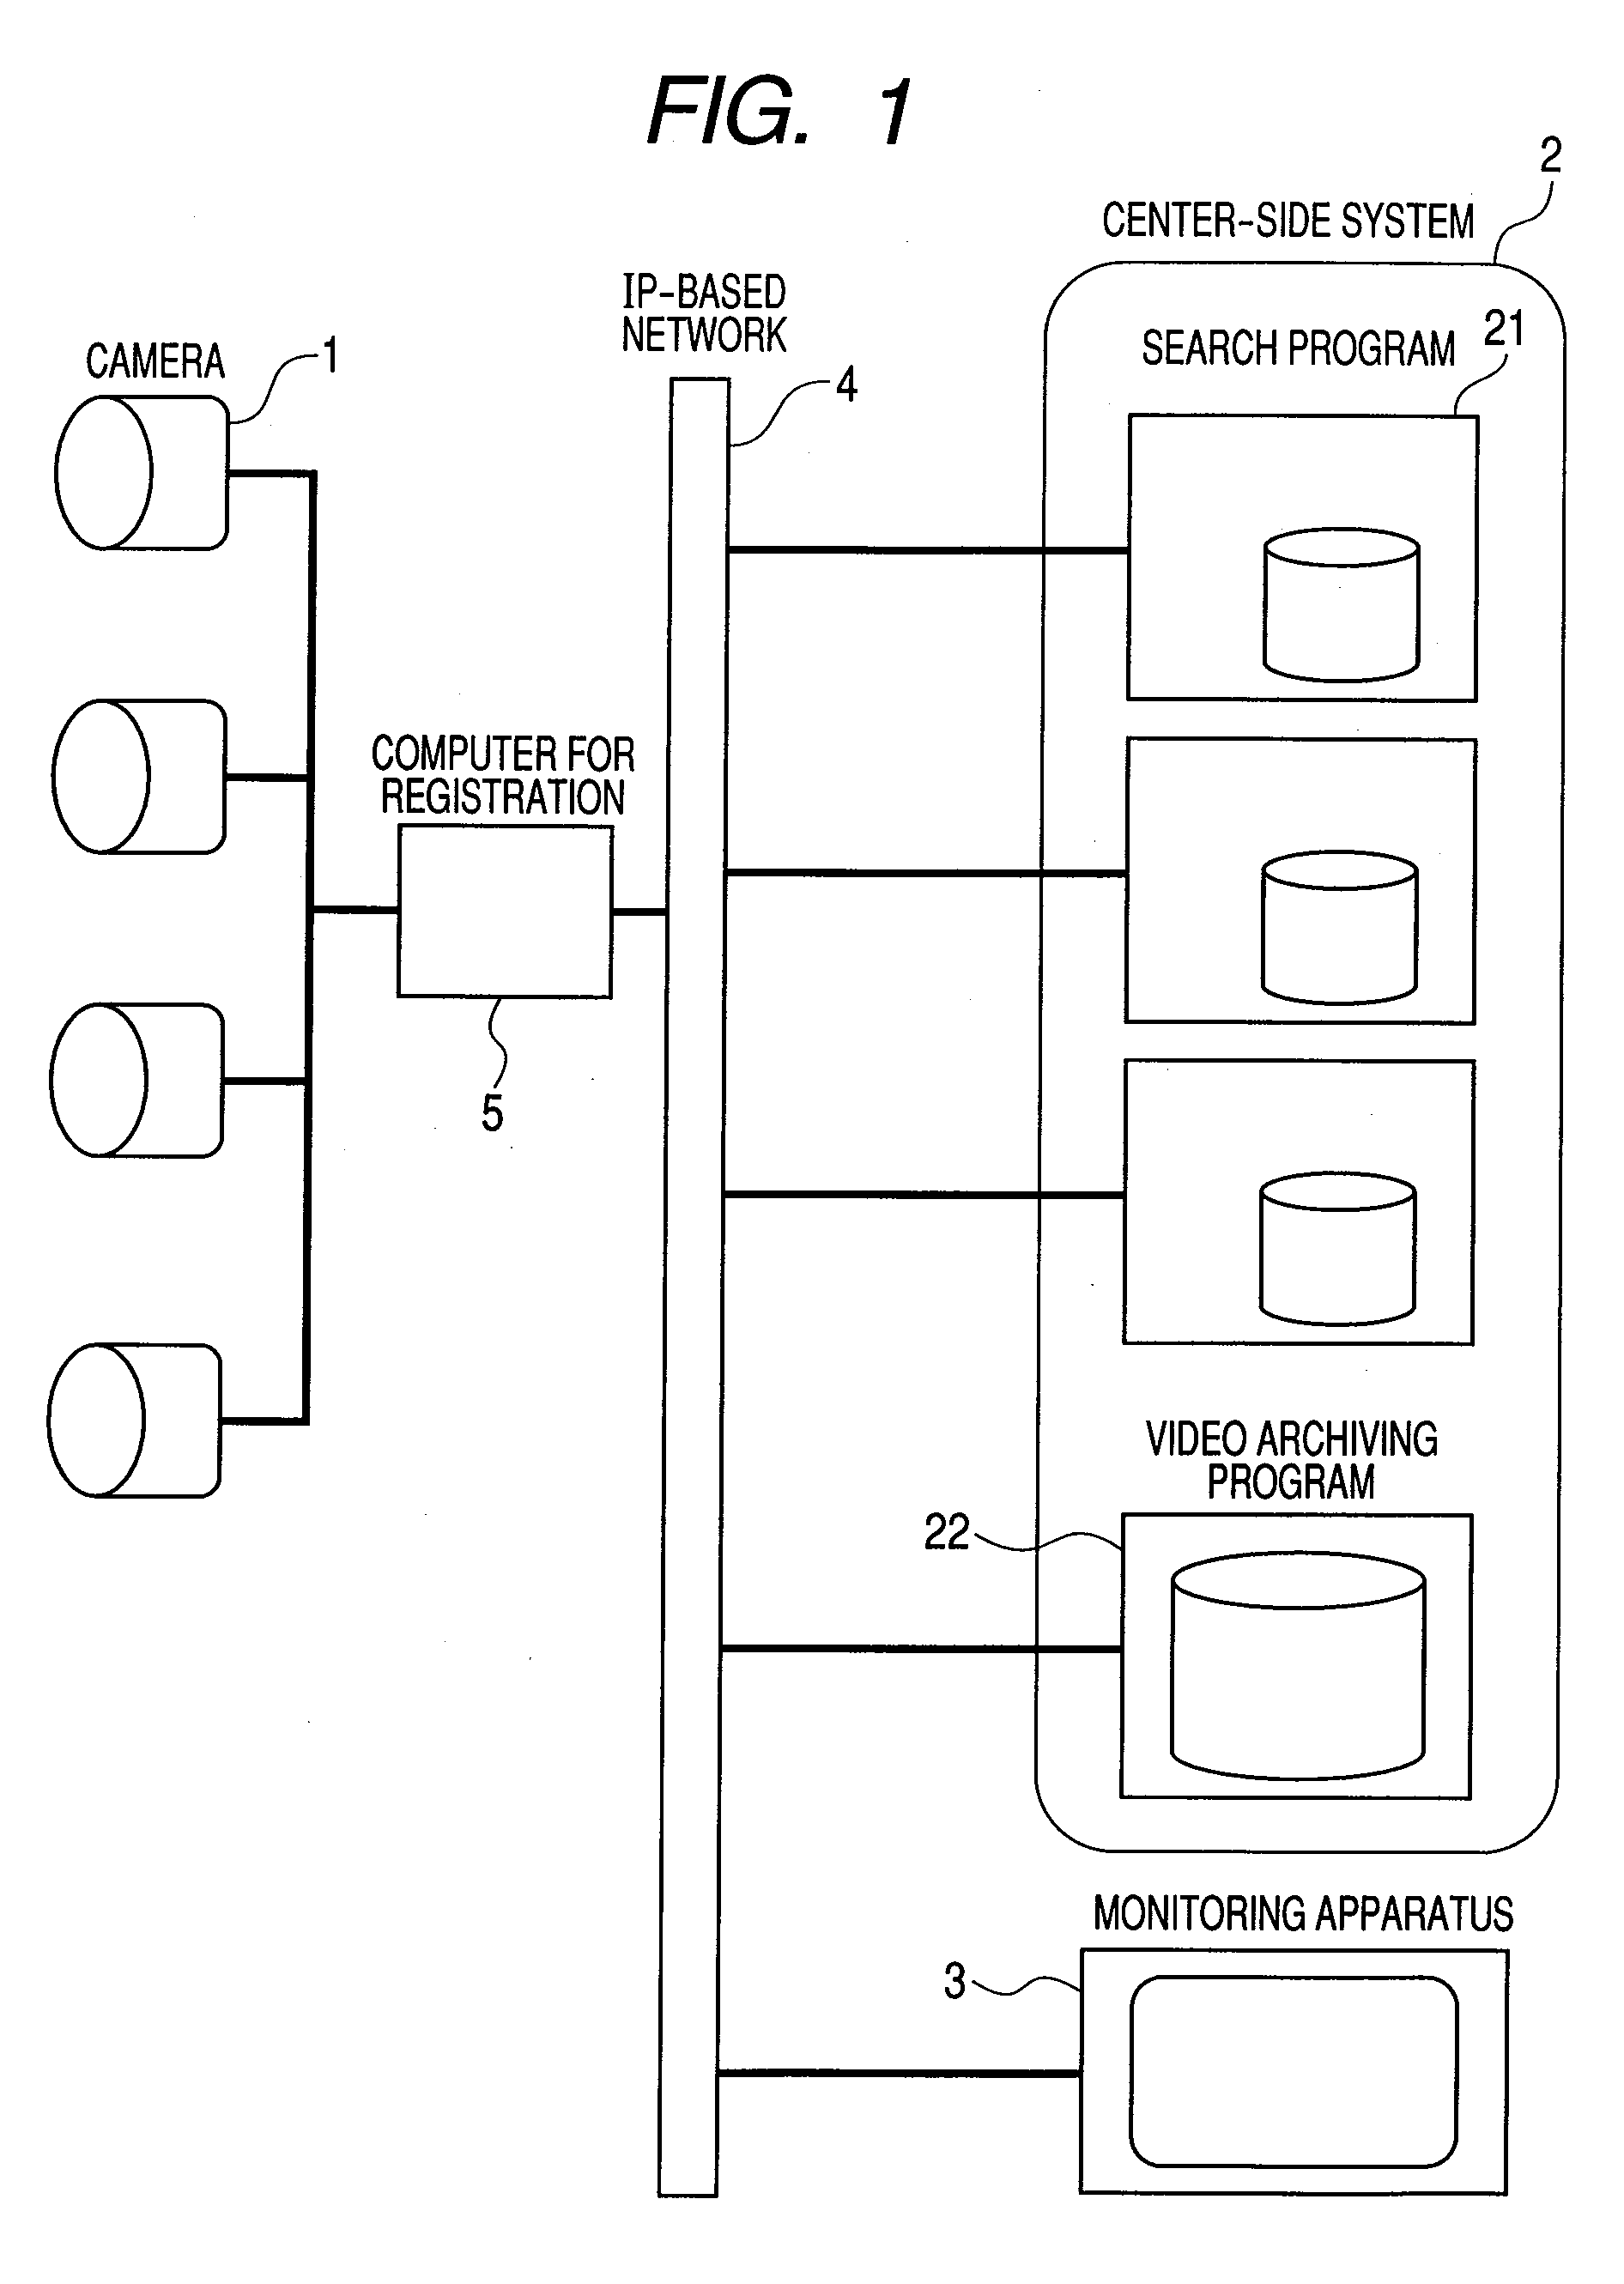 Video surveillance system and method using ip-based networks